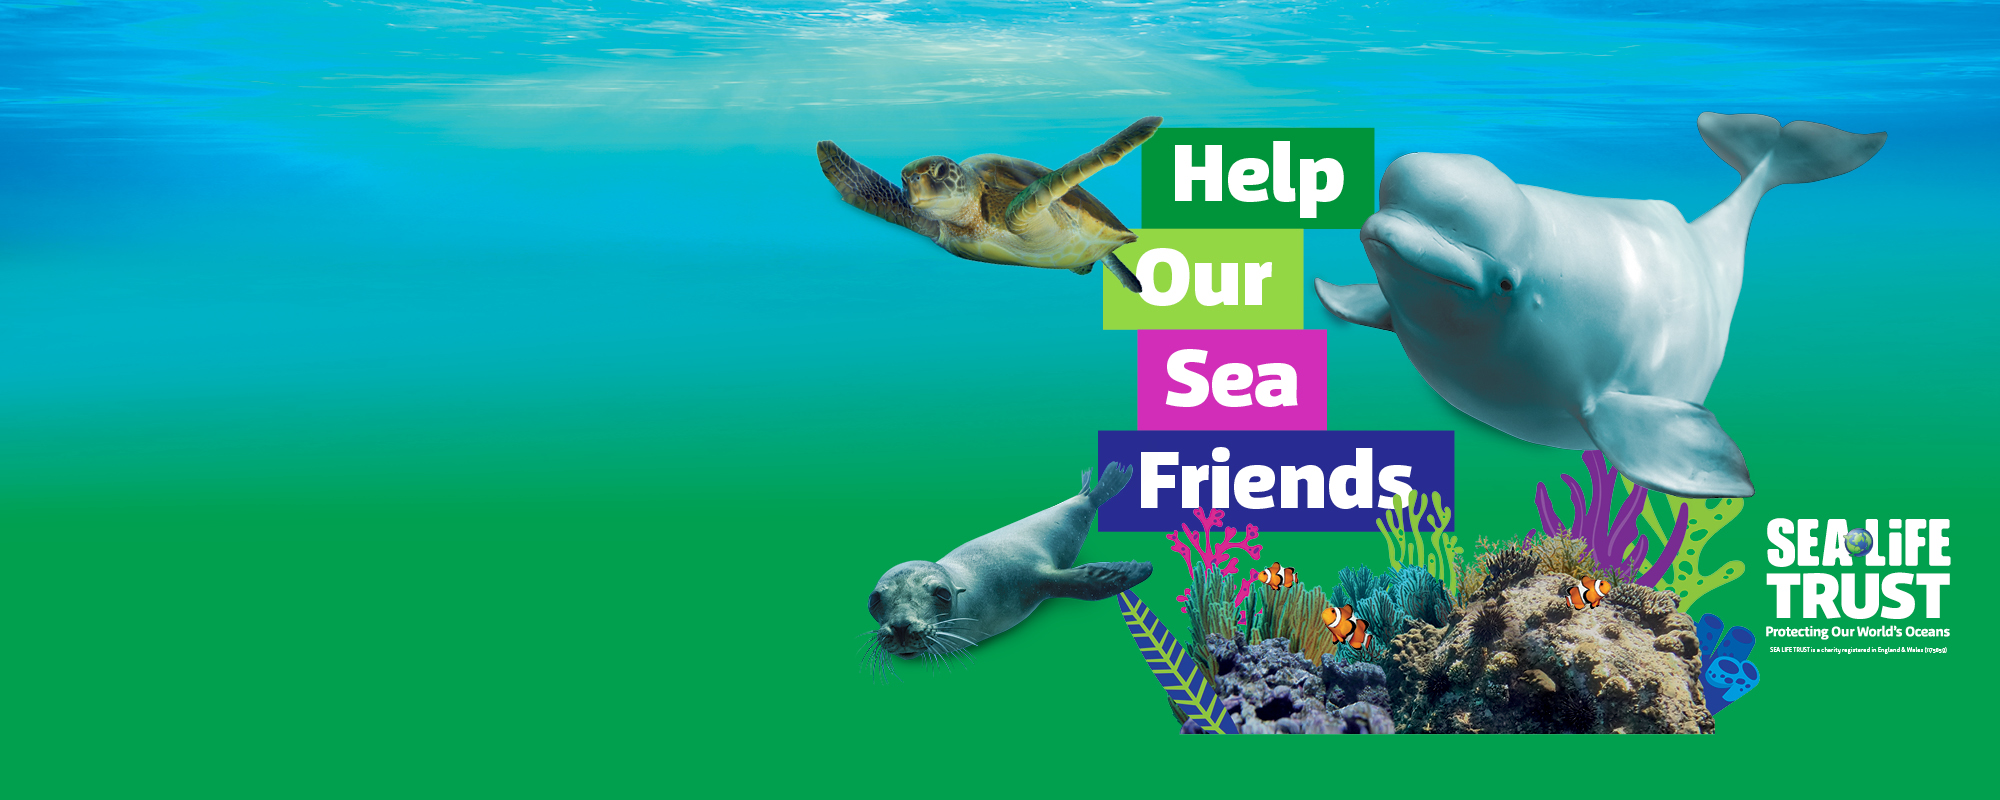 Image featuring a seal, sea turtle, and beluga whale with the messaging 